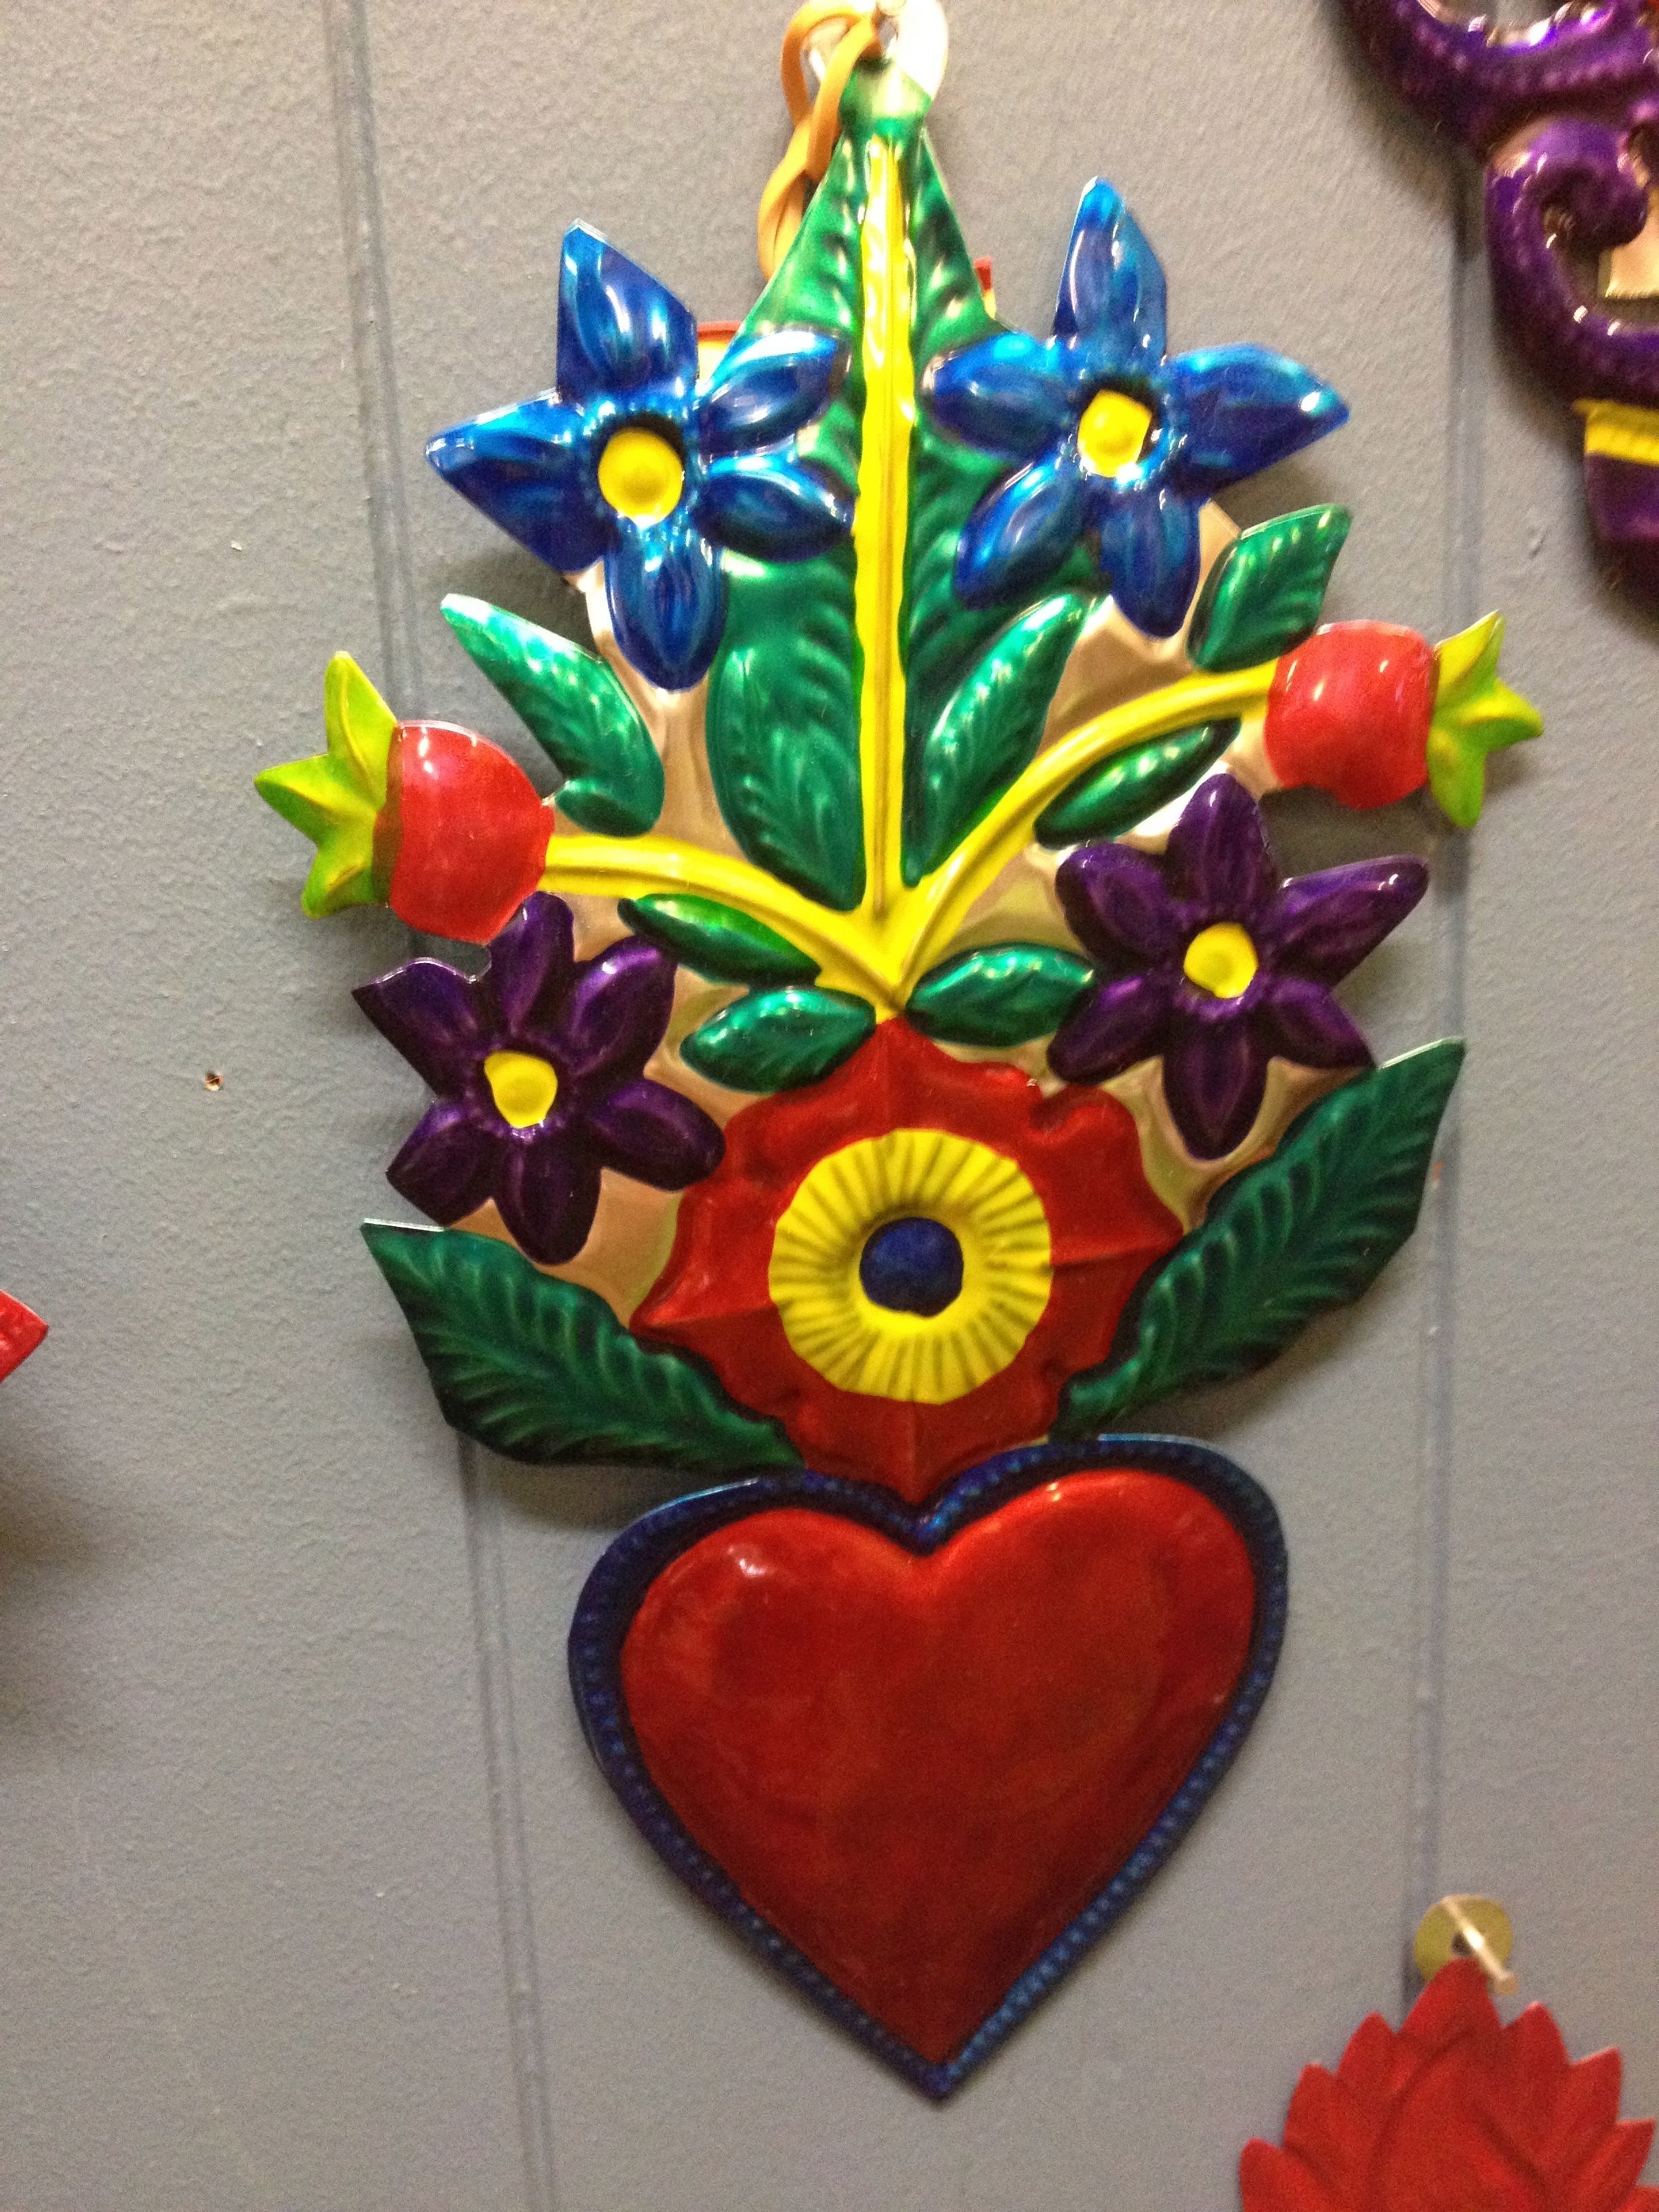 Most Recent Tin Wall Art In Mexican Tin Wall Art – Red Heart With Colourful Flowers (View 8 of 15)